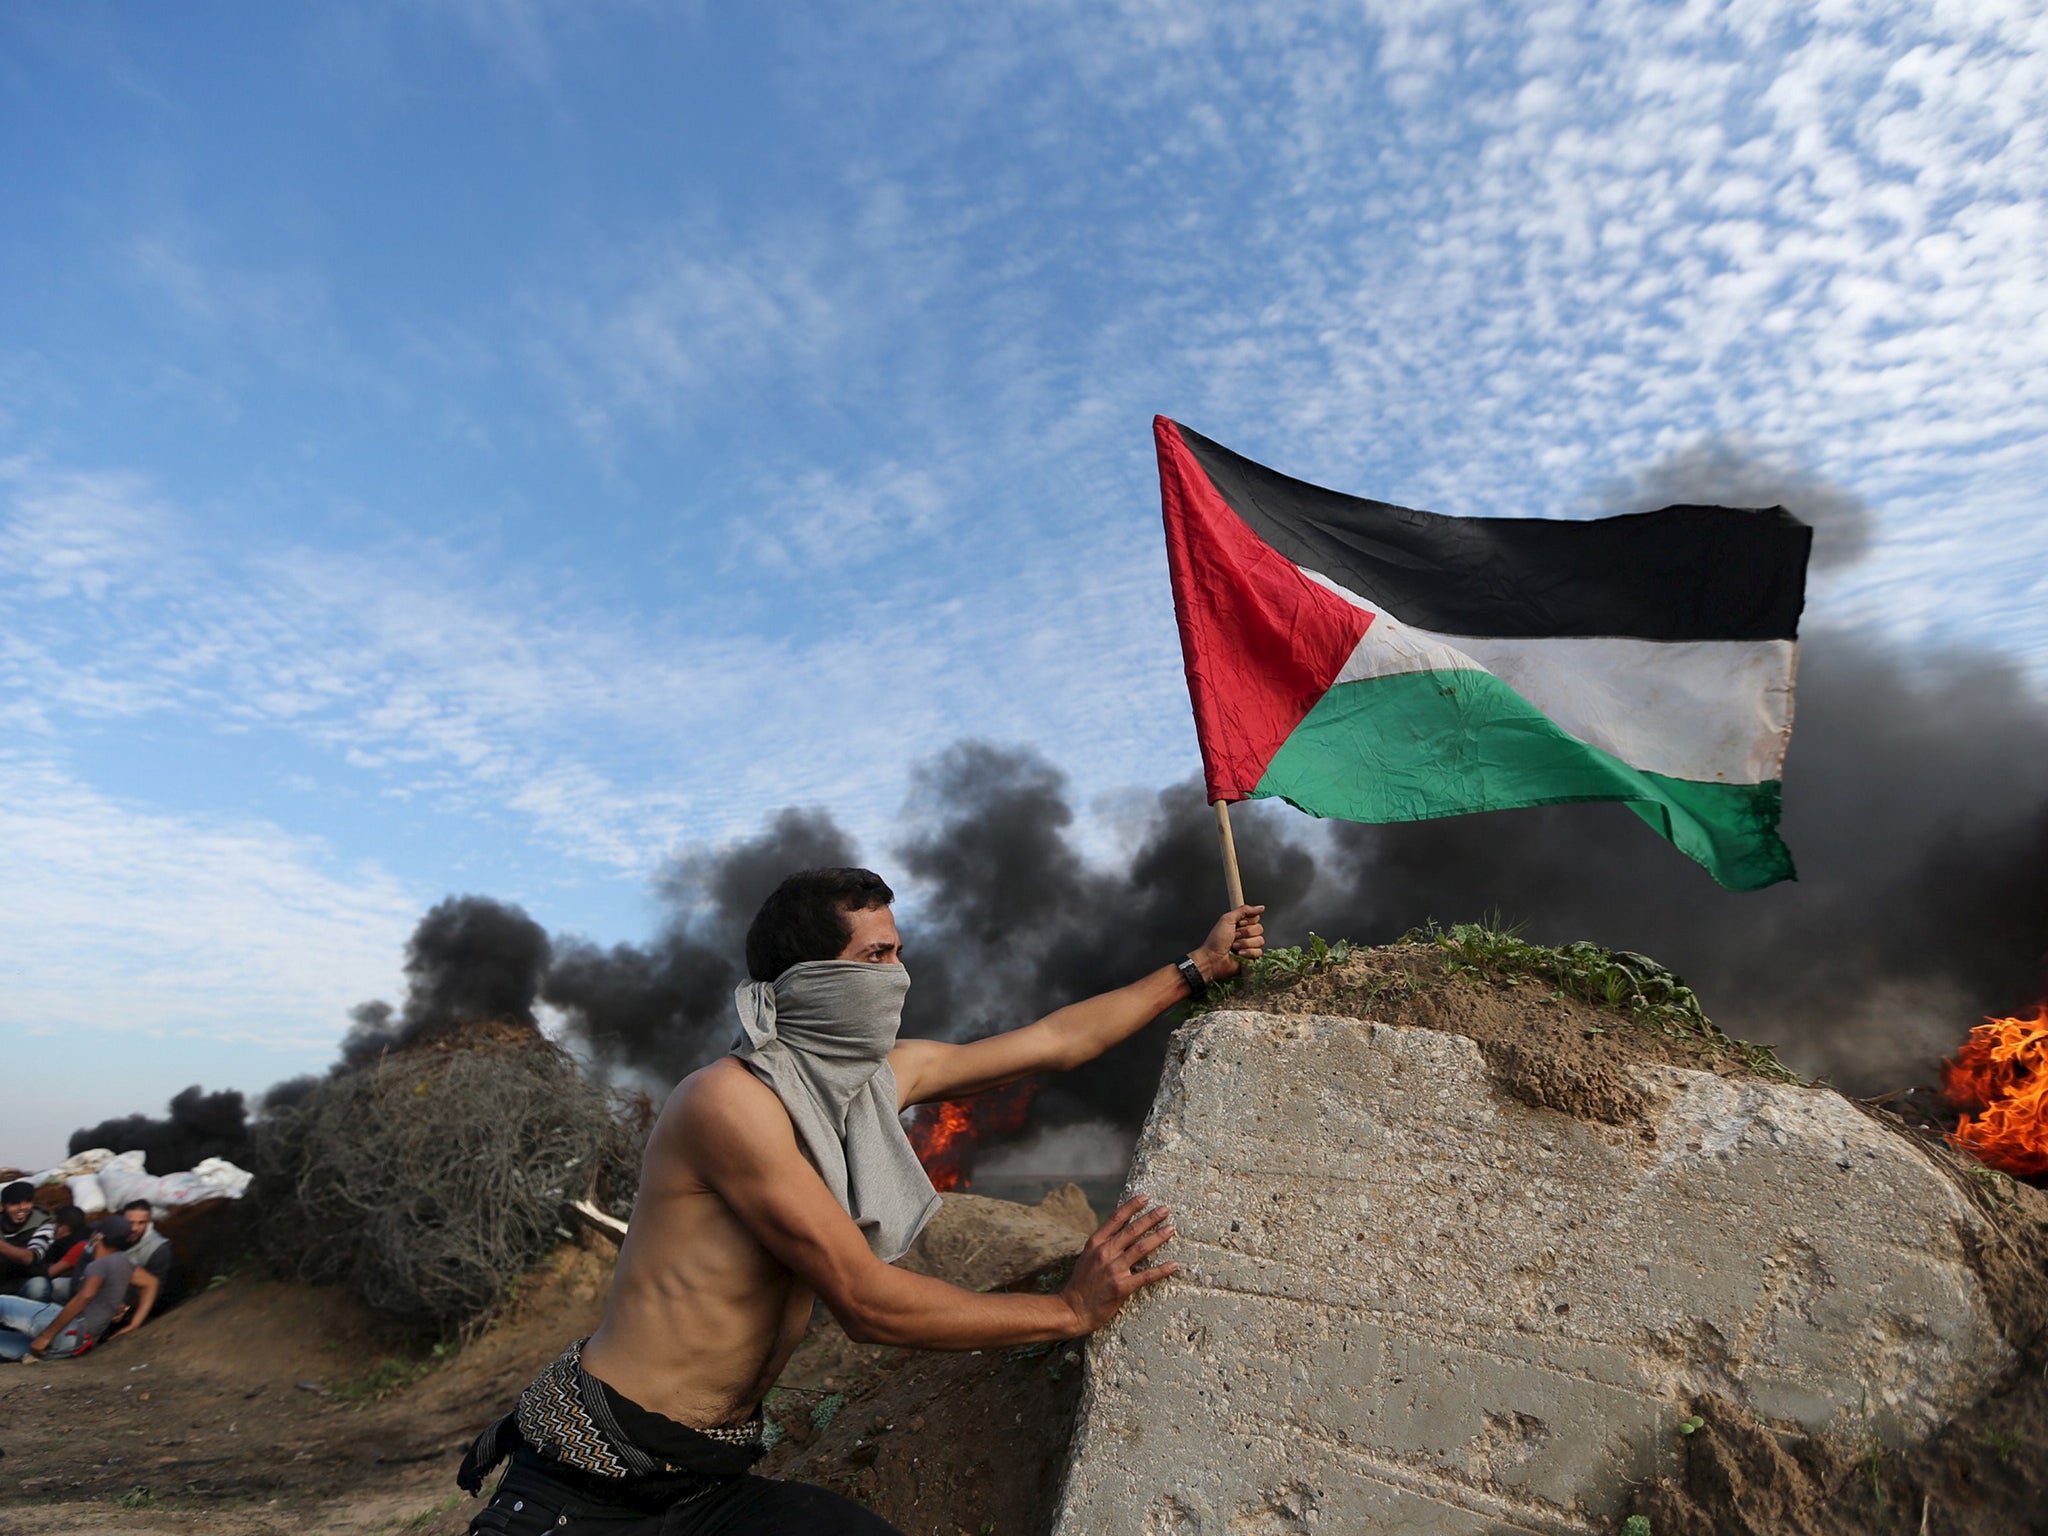 A protester places a Palestinian flag during clashes with Israeli troops near the border between Israel and Central Gaza Strip